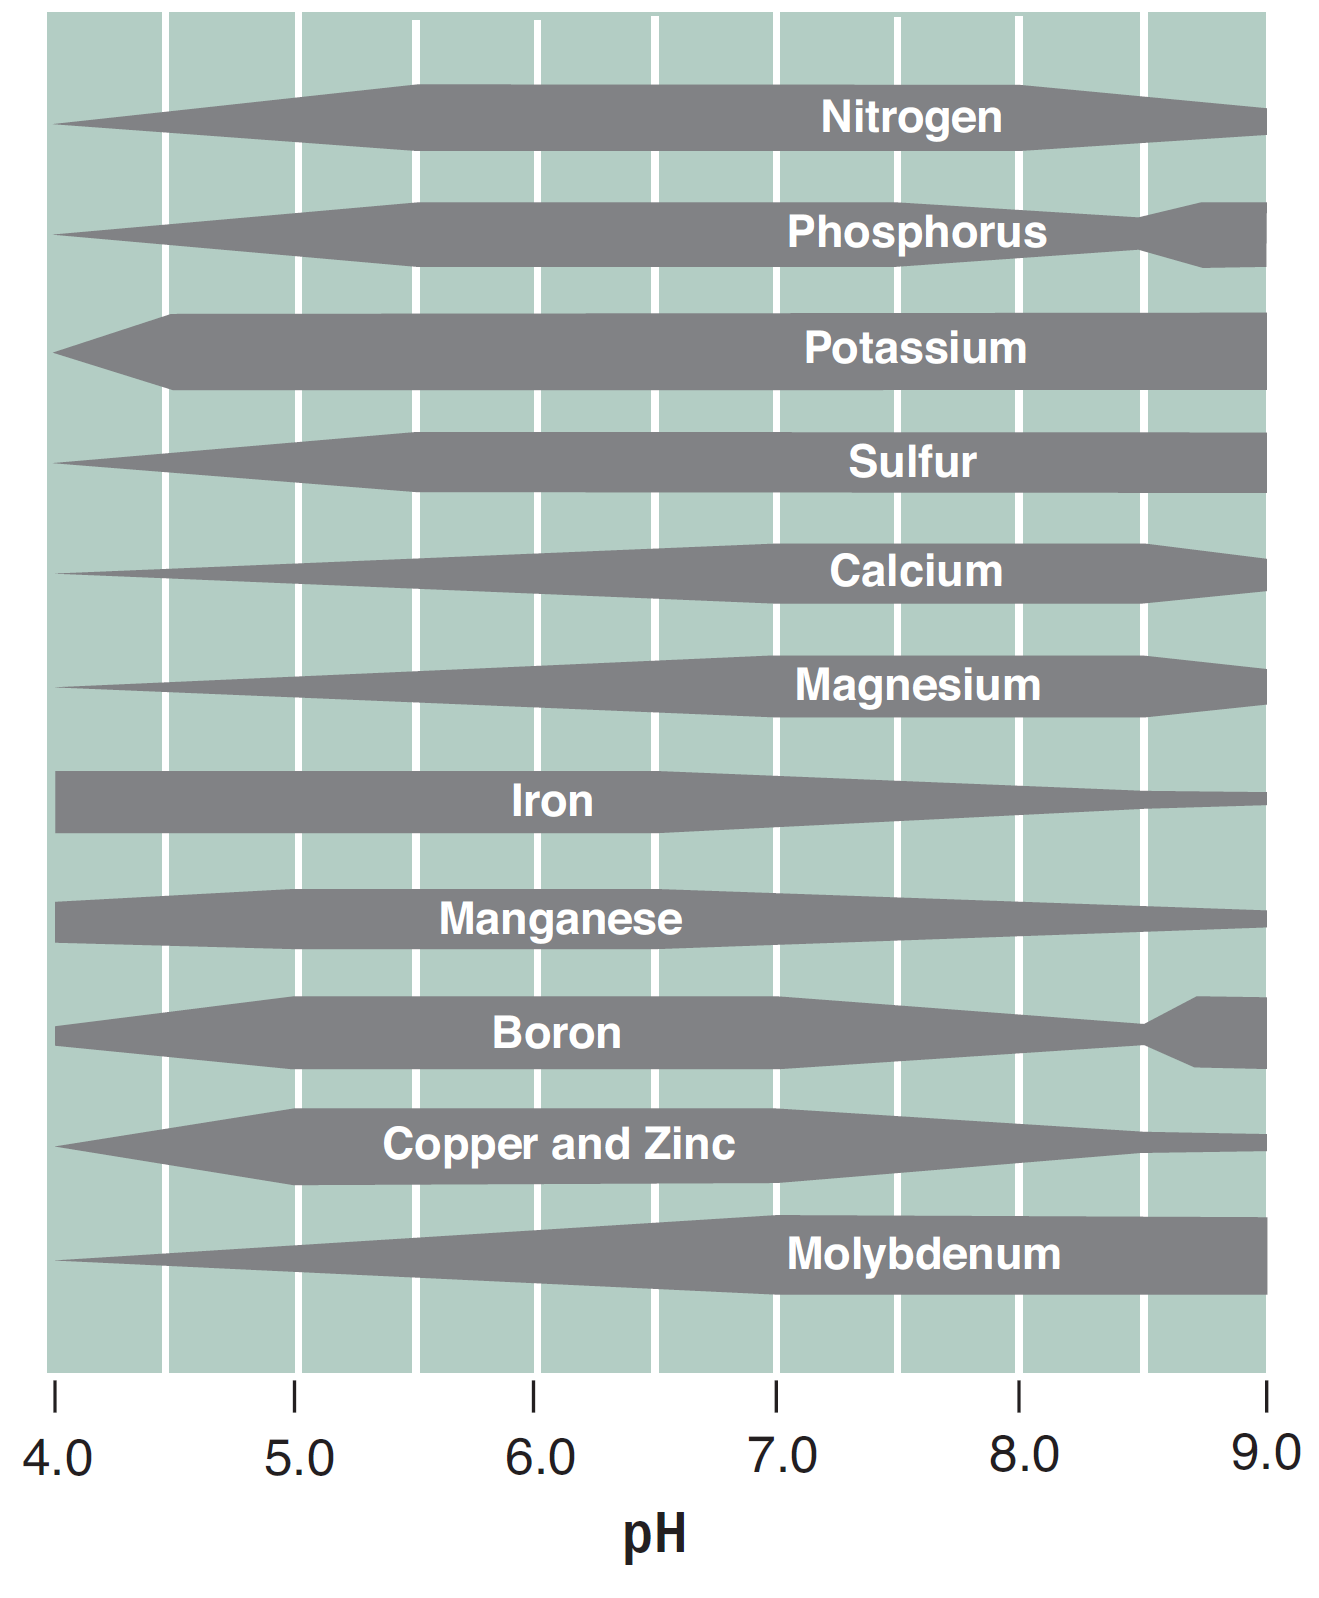 Iron, Manganese, Boron, Copper, and Zinc tend to have higher nutrient availability at a lower pH than nitrogen, phosphorus, potassium, sulfur, calcium, magnesium, and molybdenum